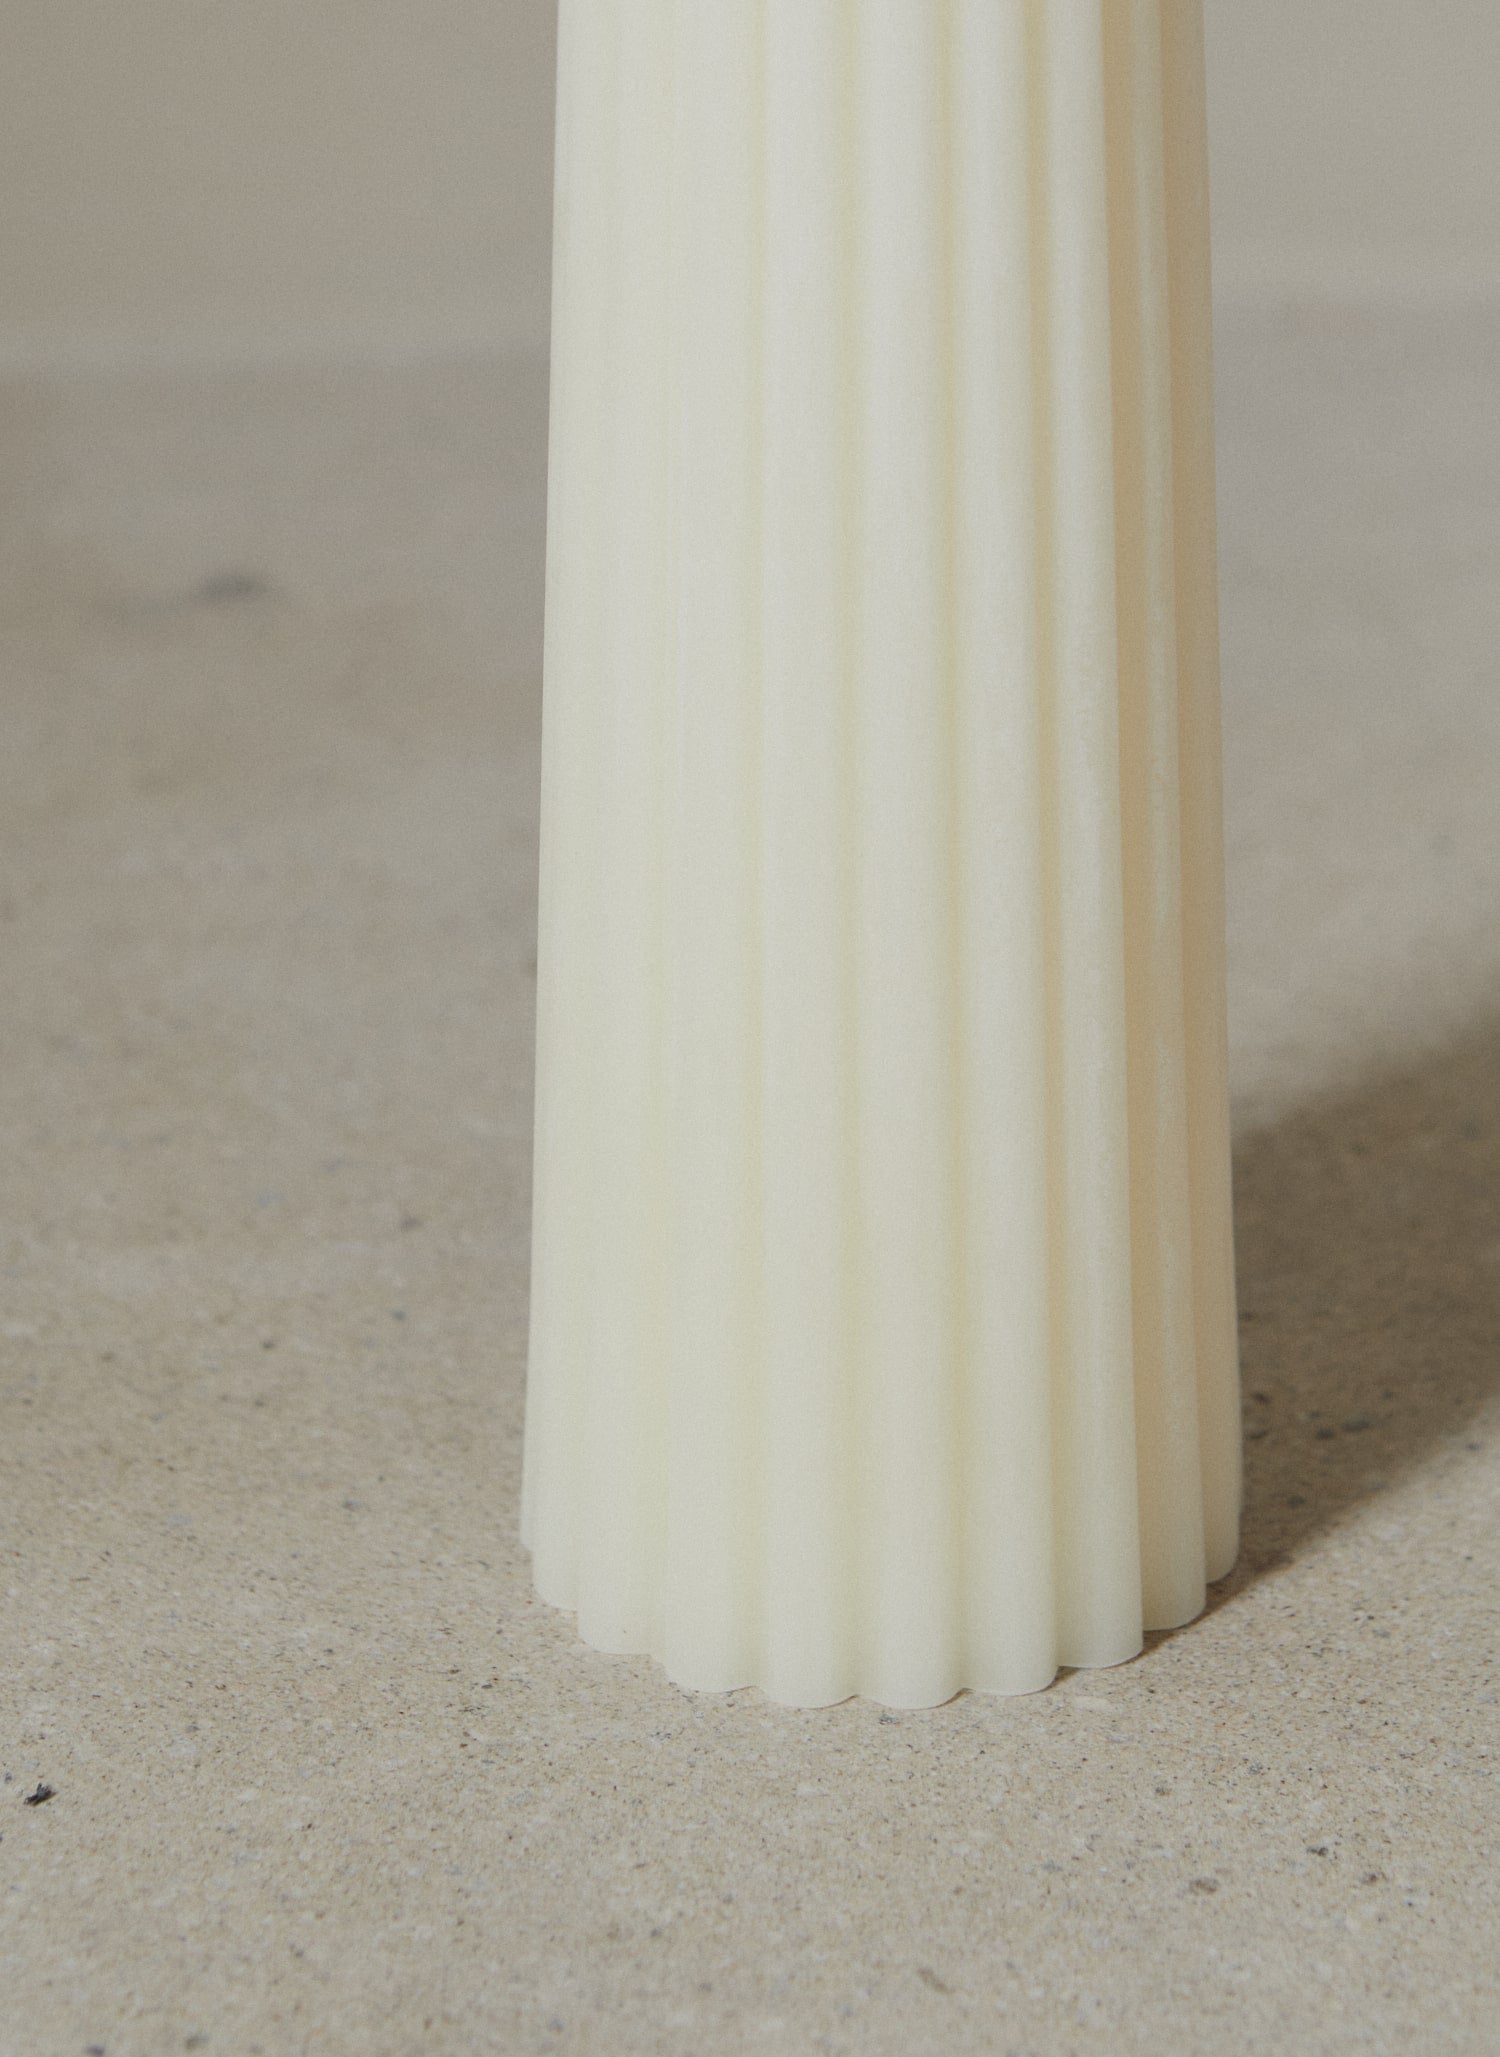 View of ribbed texture at base of Greentree Home Cream Textured Pillar candle.